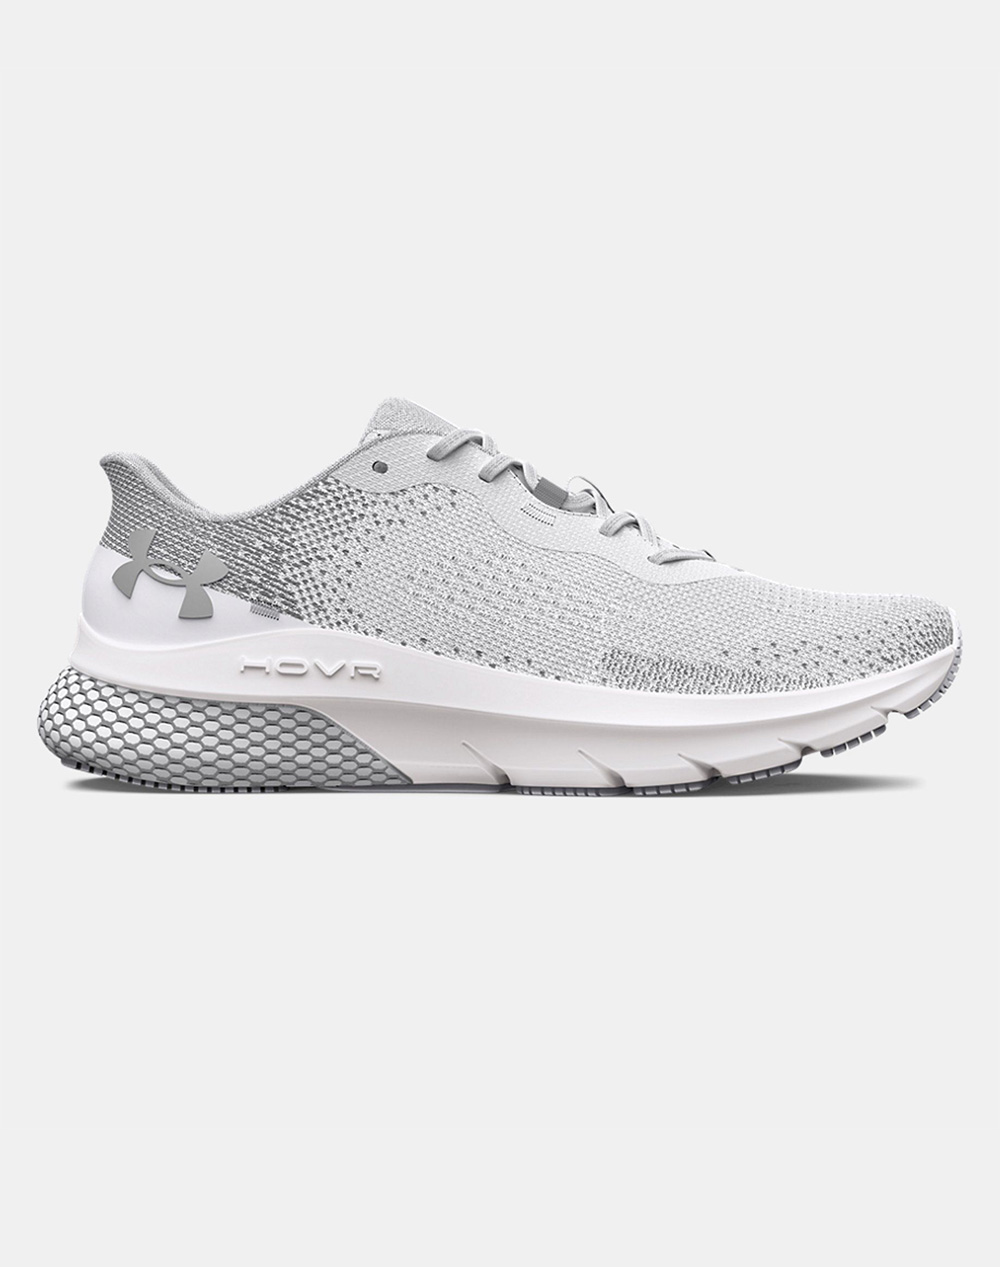 UNDER ARMOUR Women”s UA HOVR™ Turbulence 2 Running Shoes 3026525-9191 Gray